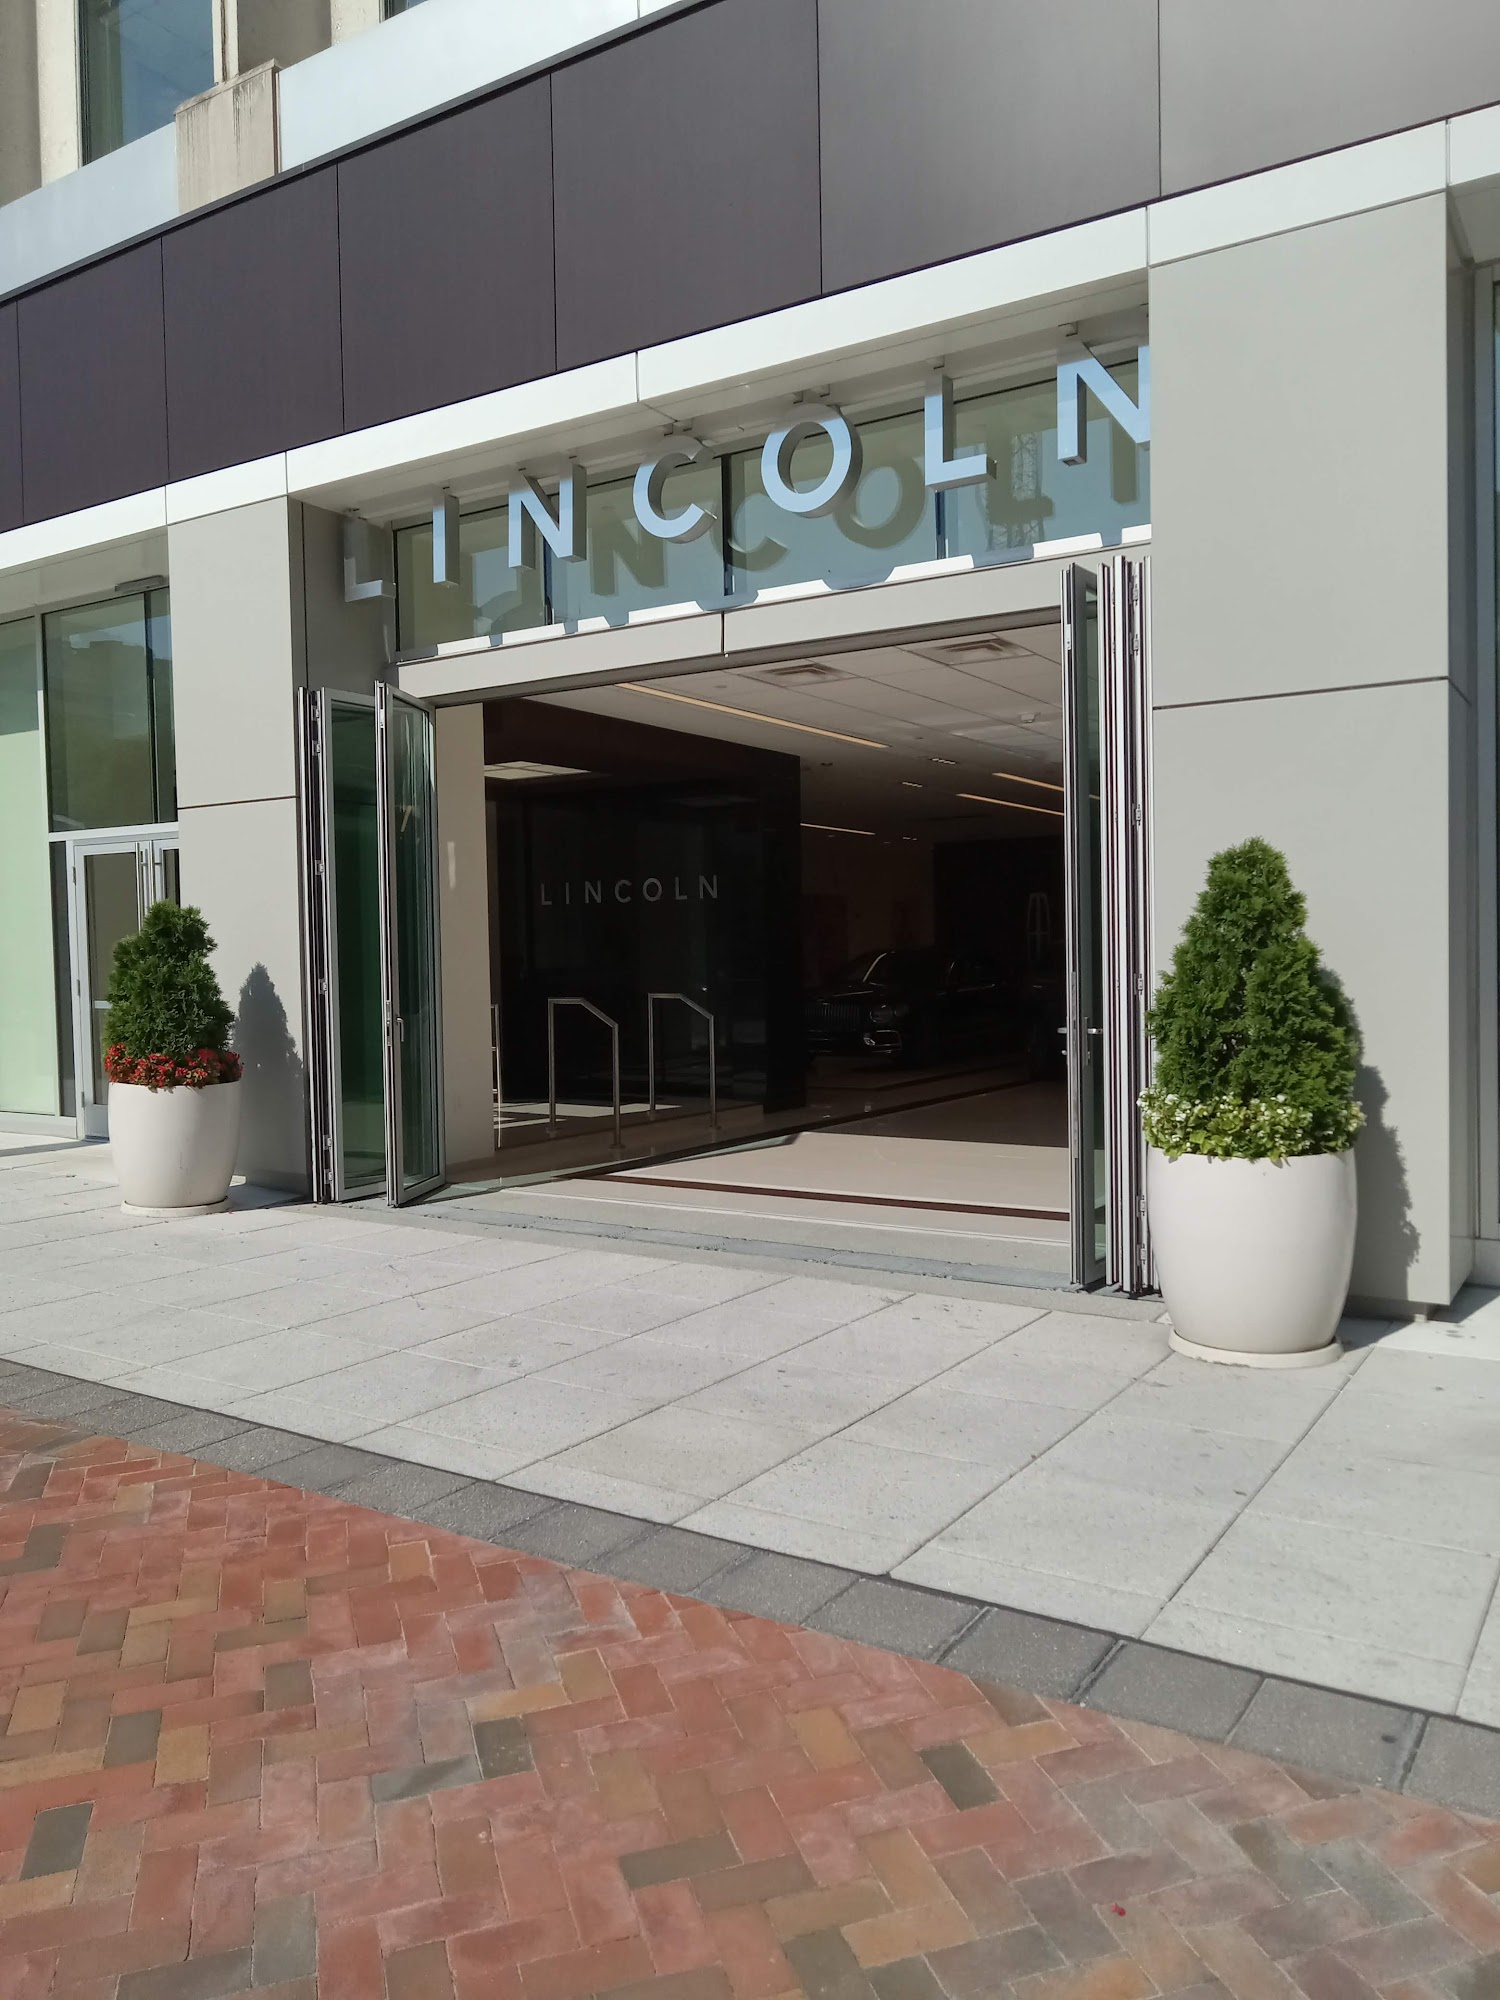 Lincoln Financial Group